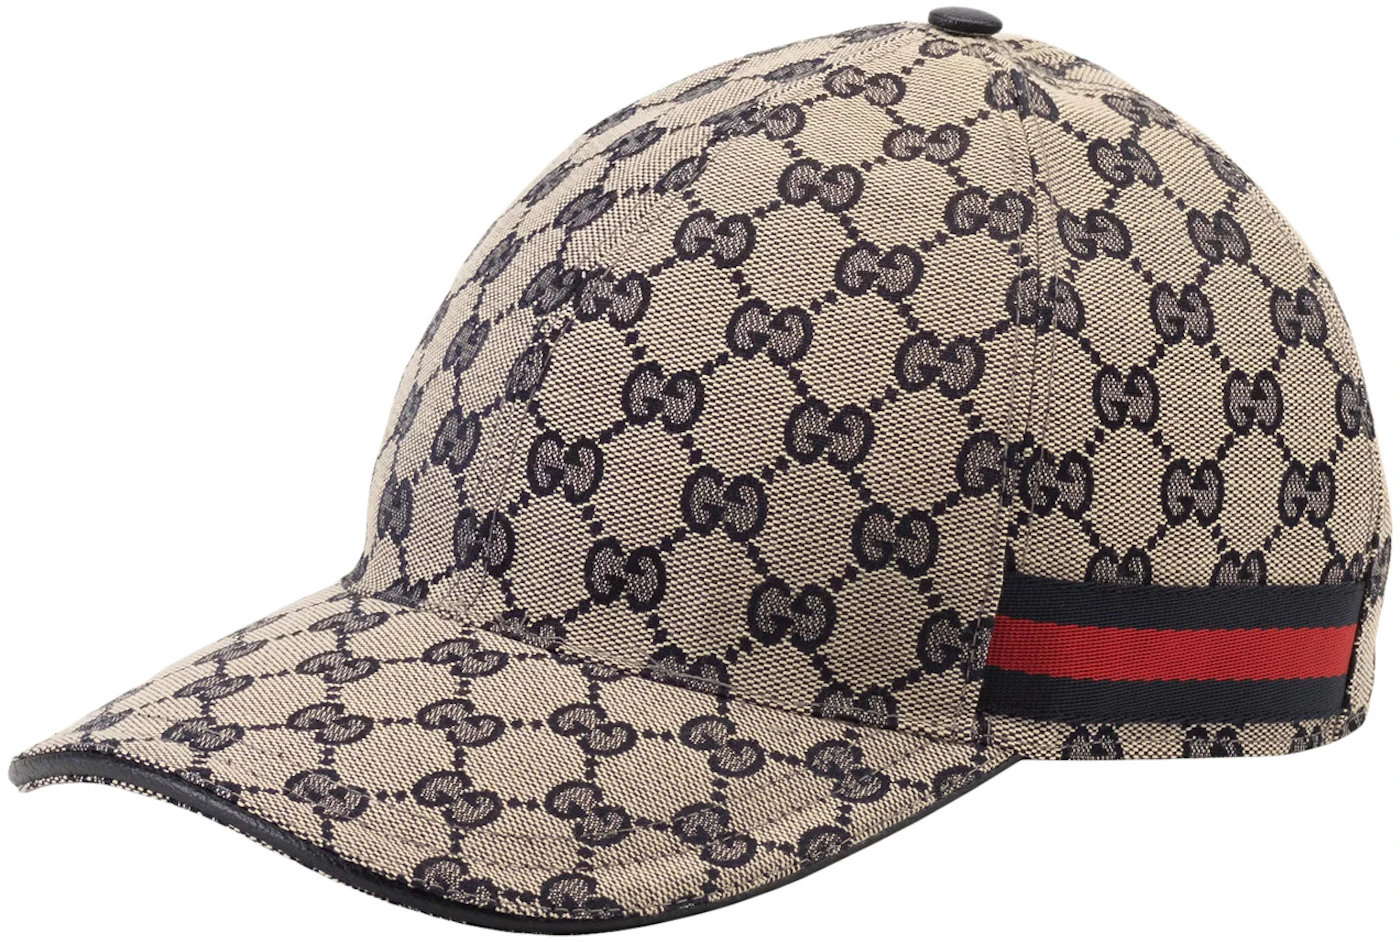 Yankees™ and GG print baseball hat in light blue